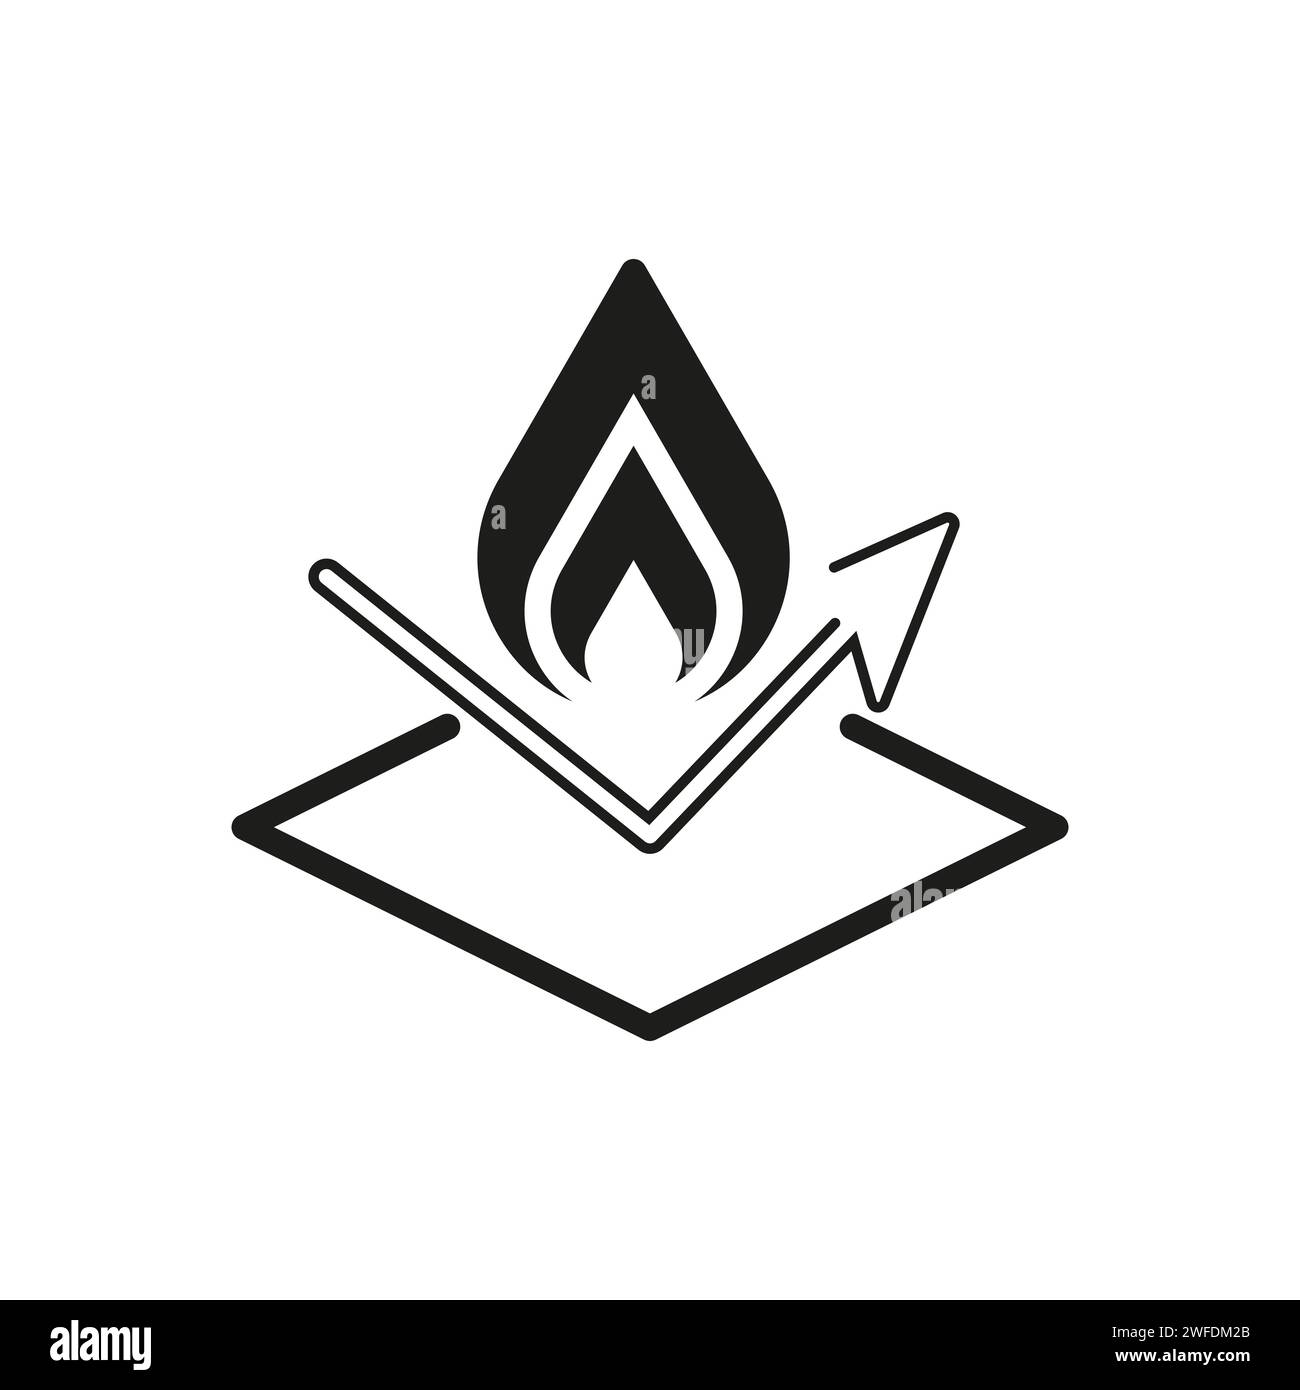 Fireproofing icon. Vector illustration. EPS 10. Stock image. Stock Vector